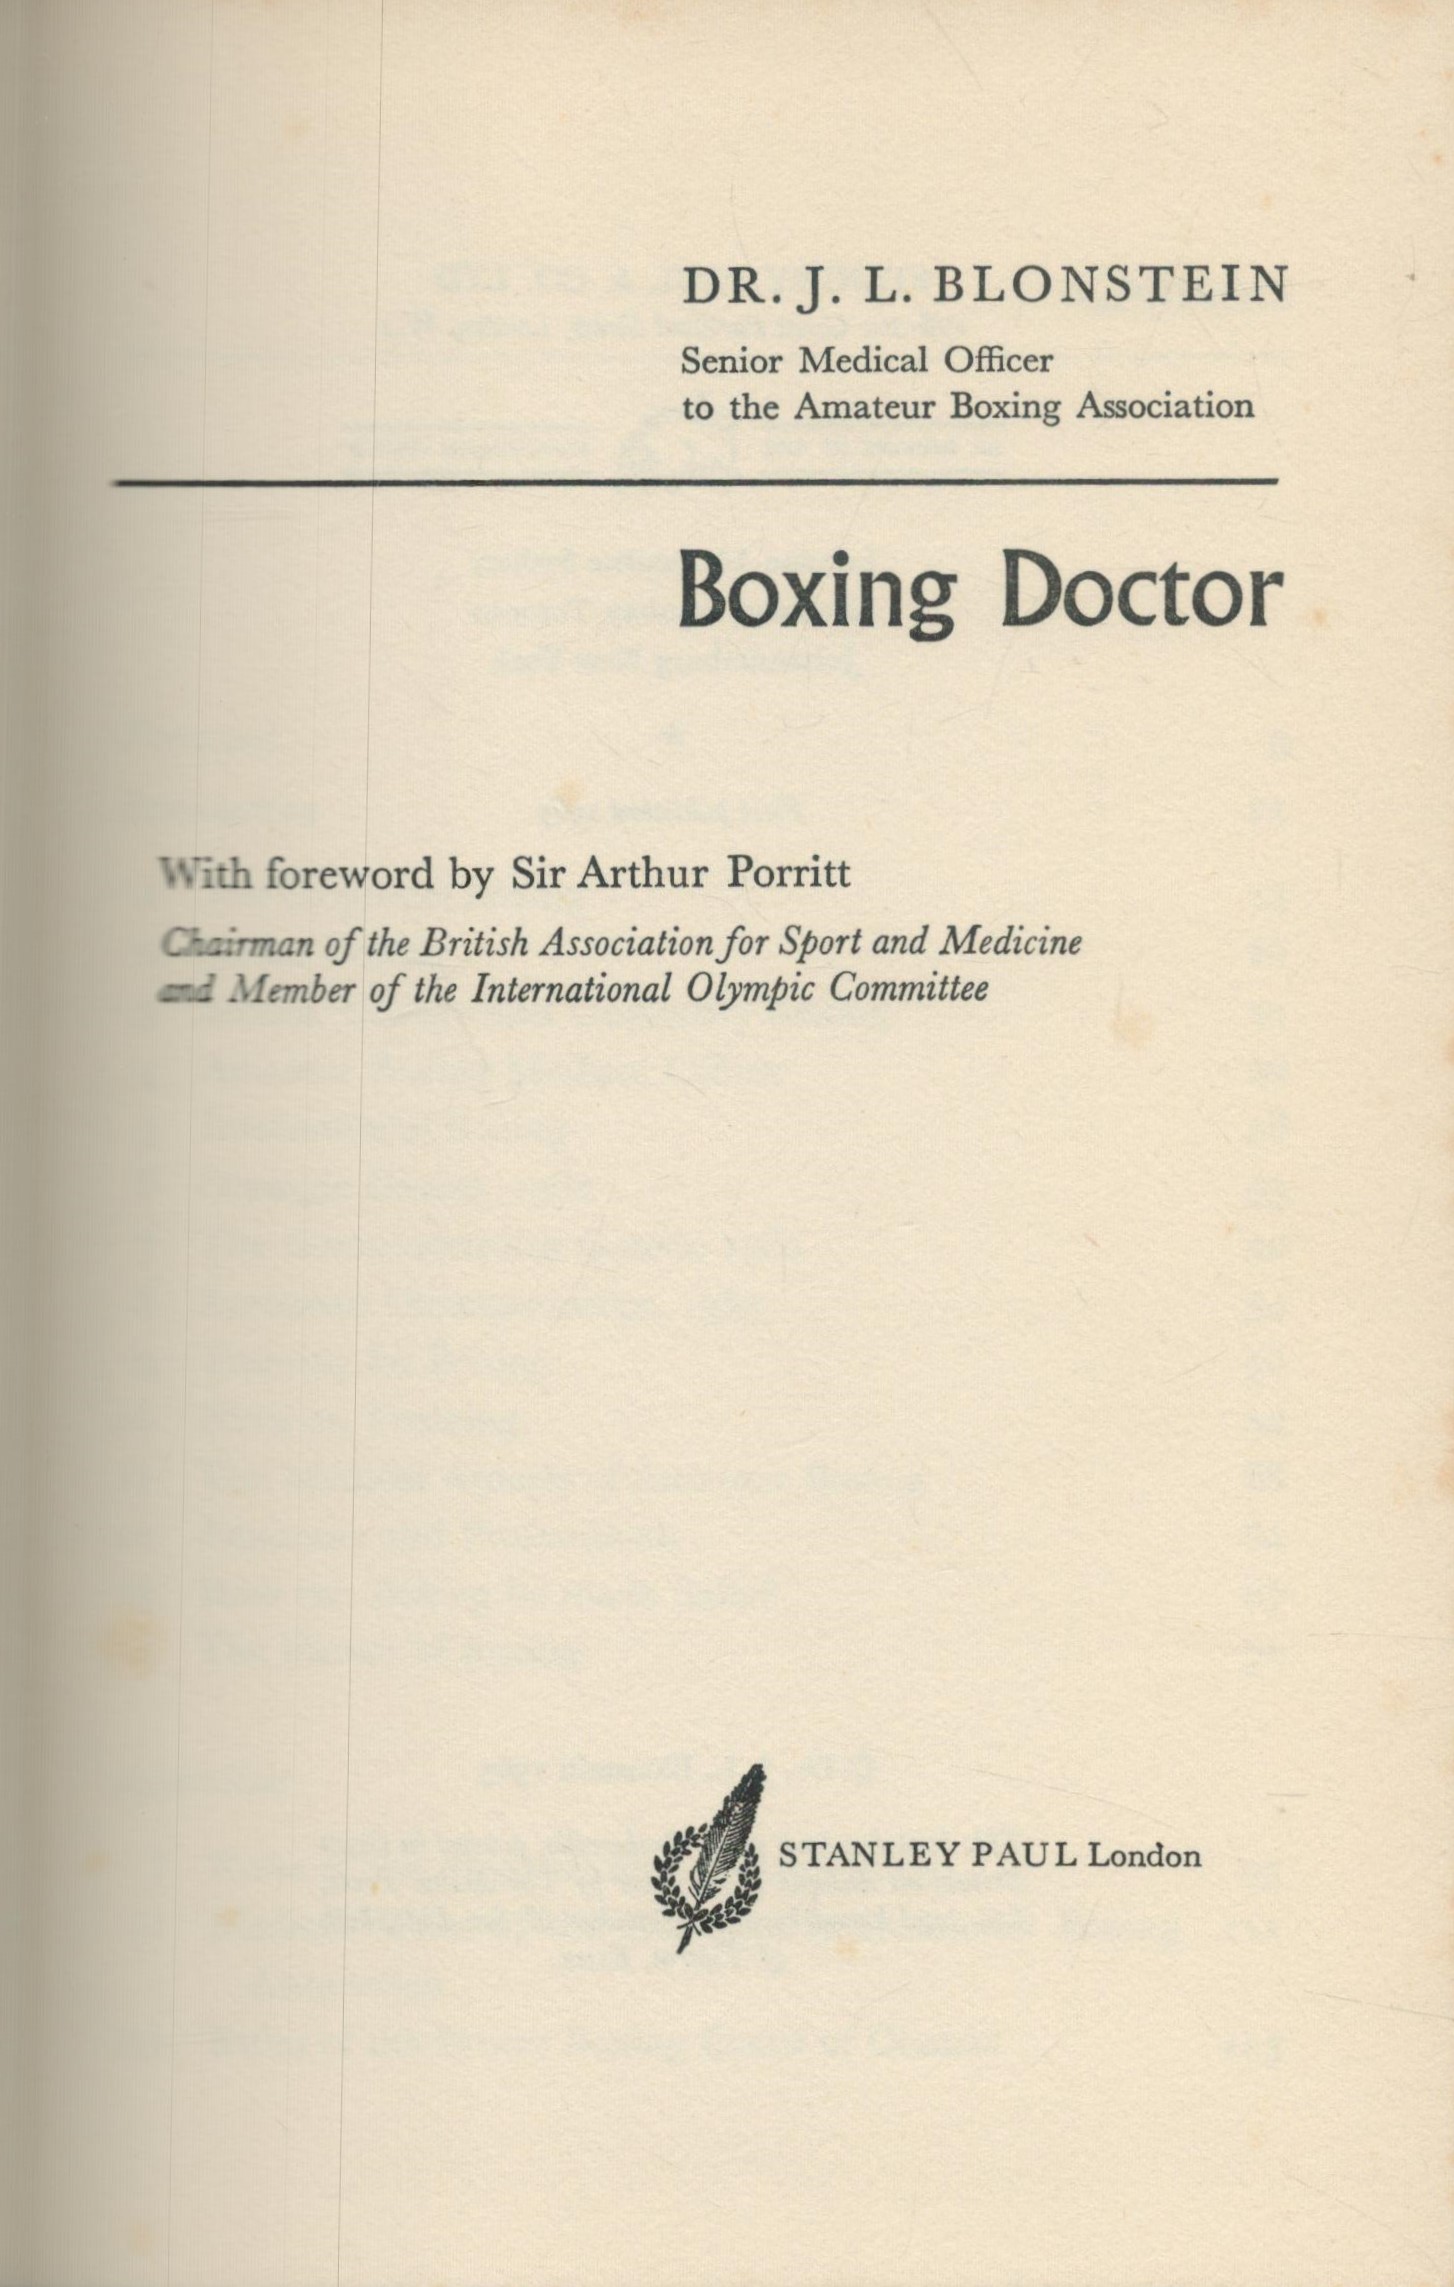 Boxing Doctor by Dr. J.L. Blonstein Hardback book, 127 pages. Some pencil marks on pages. Good - Image 2 of 3